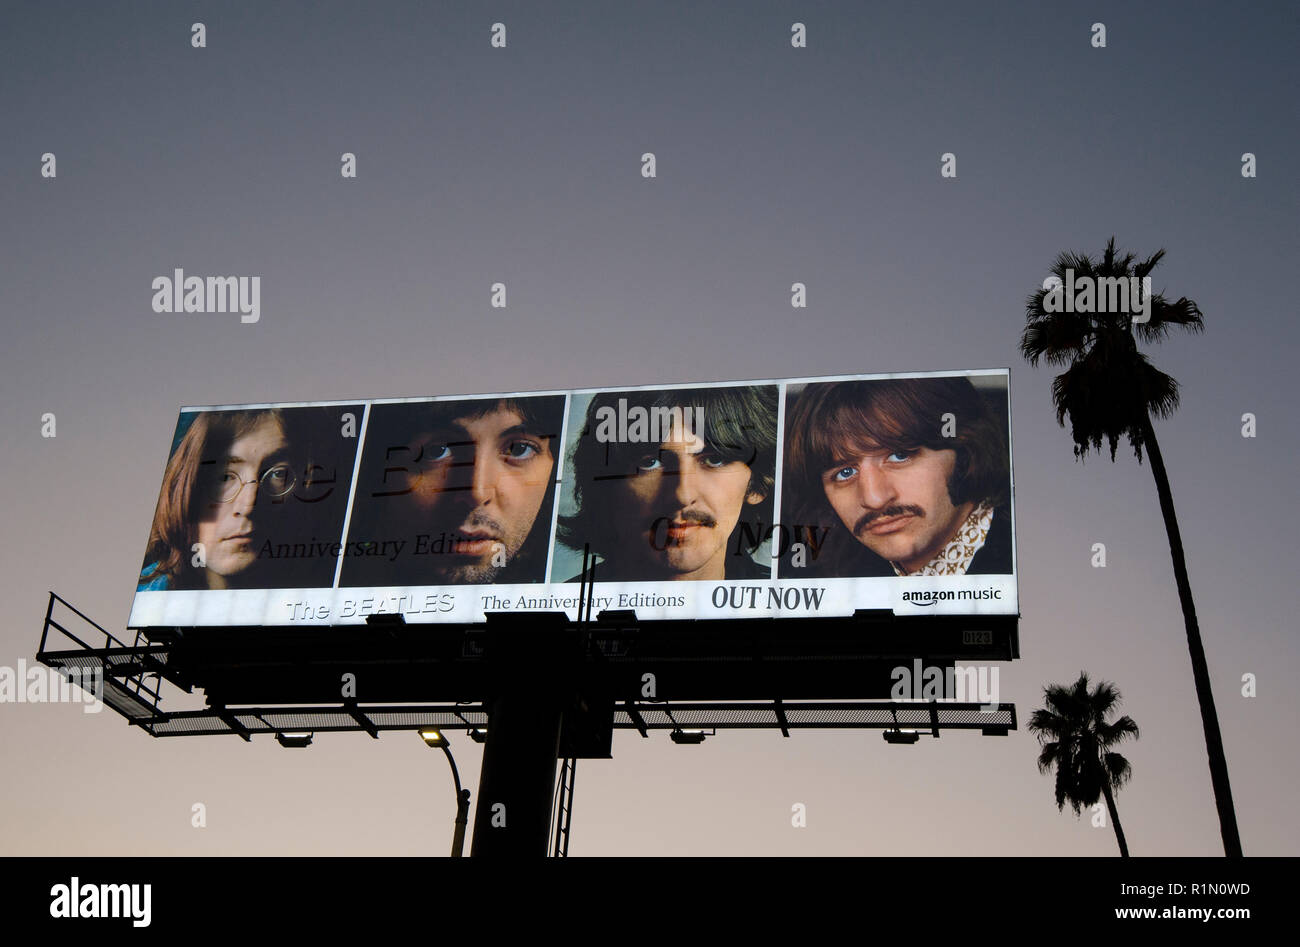 Back lit billboard for Beatles 50th anniversary re-issue of the White Album seen at sunset in Hollywood, CA Stock Photo